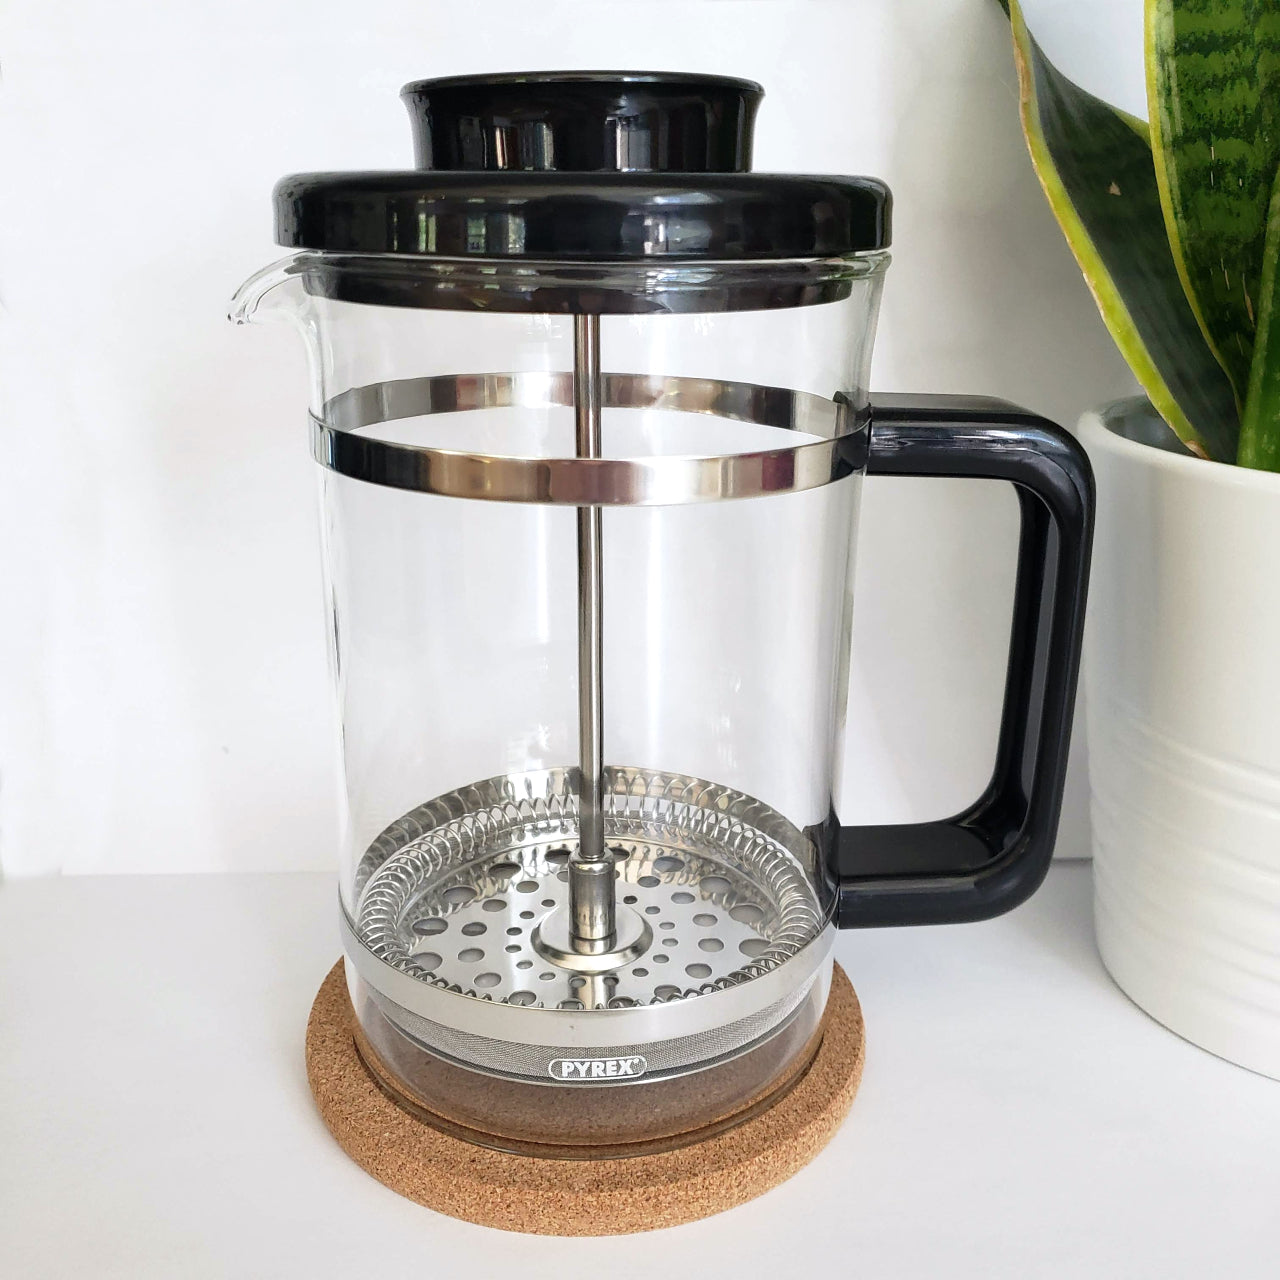 Loose Leaf Tea Press, by Rishi | A CUP OF COMMON WEALTH